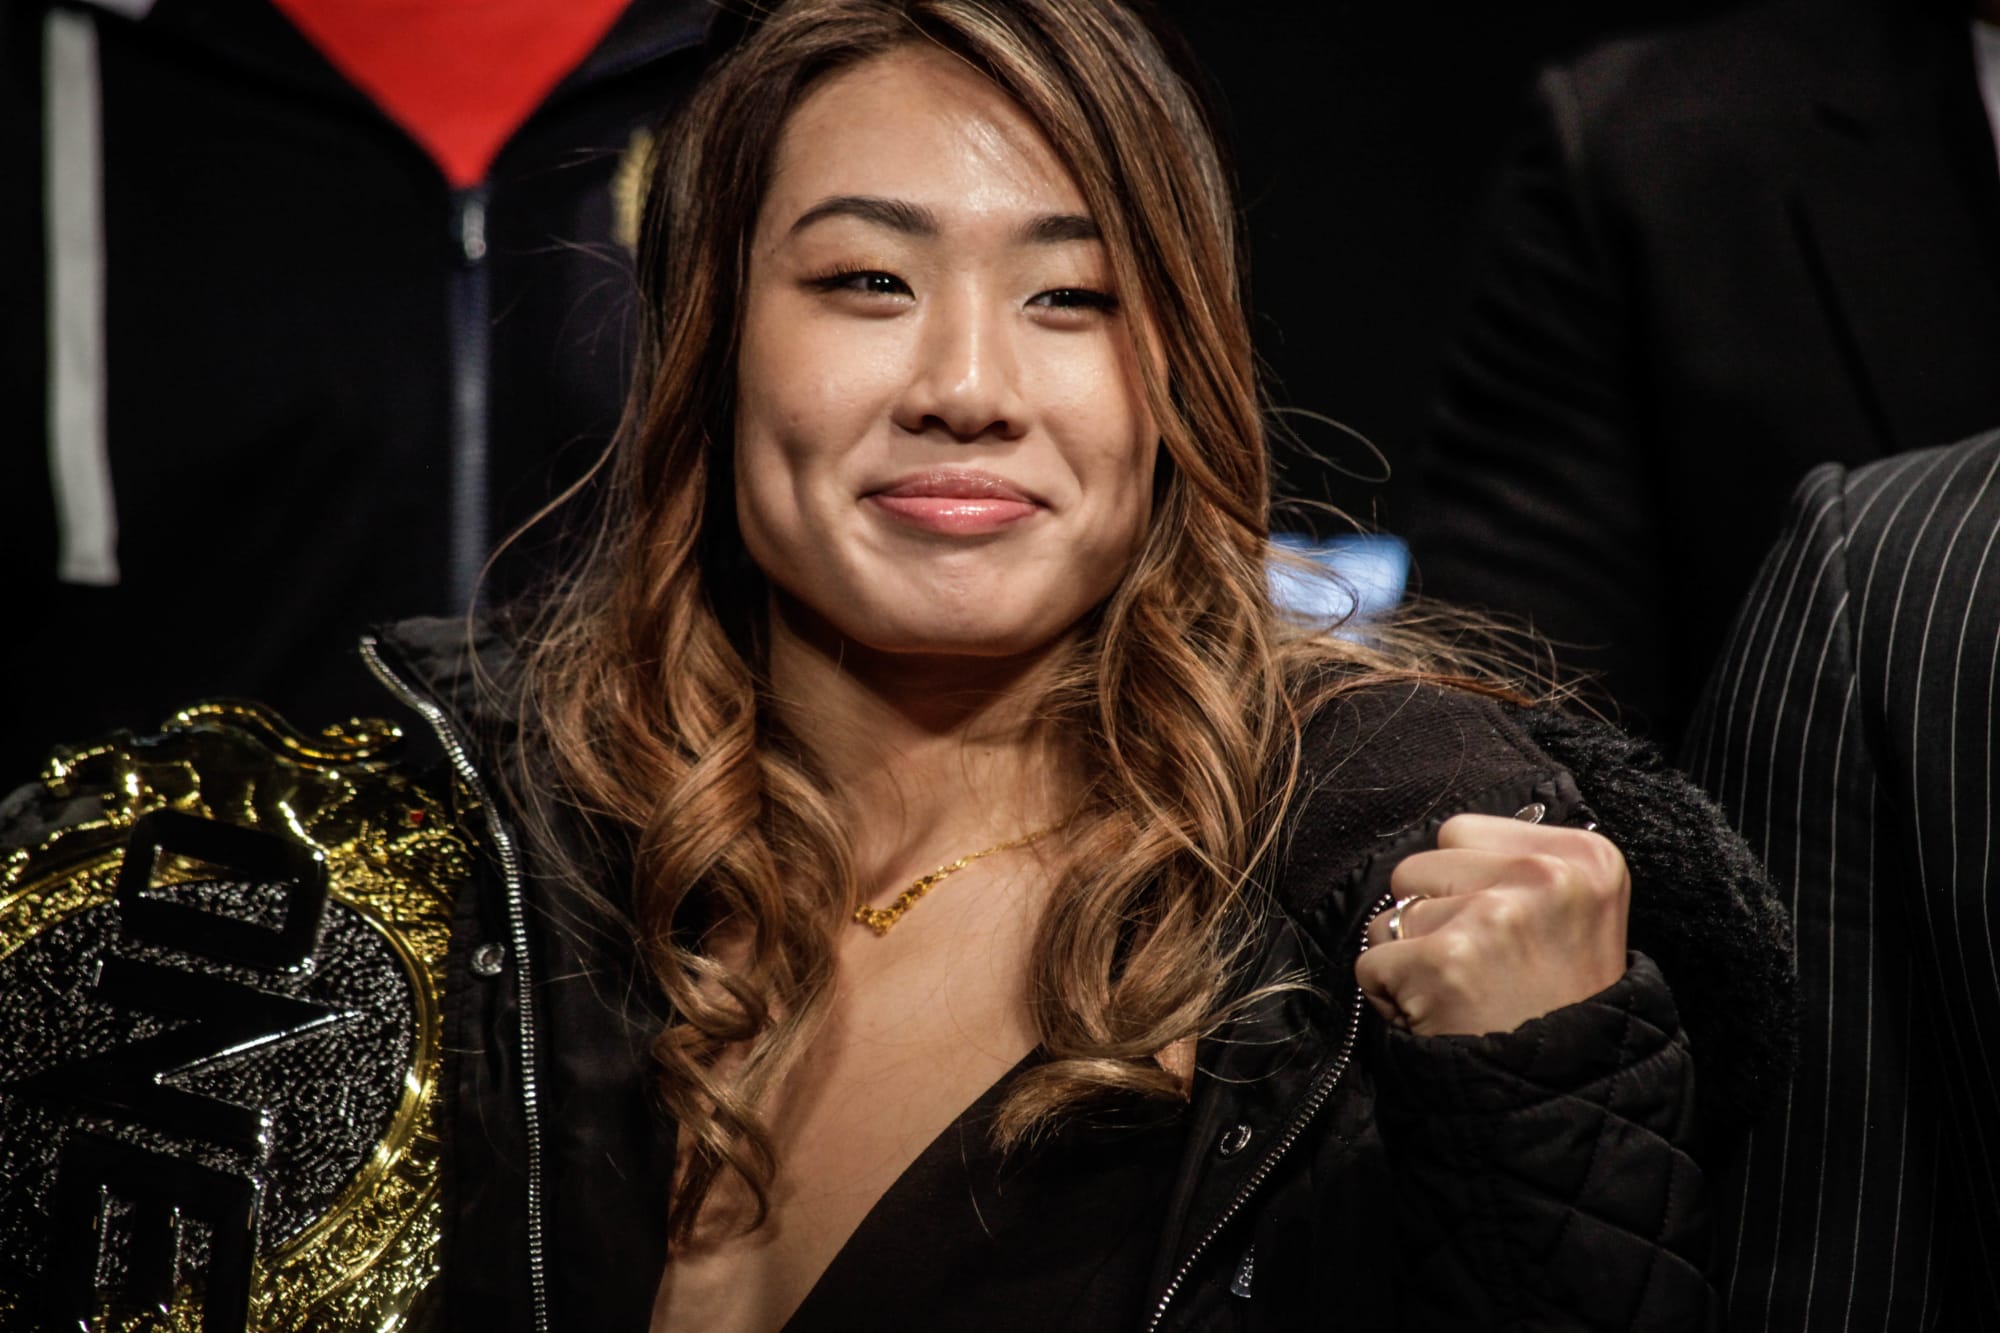 ONE Championship A brief timeline of Angela Lee's MMA career